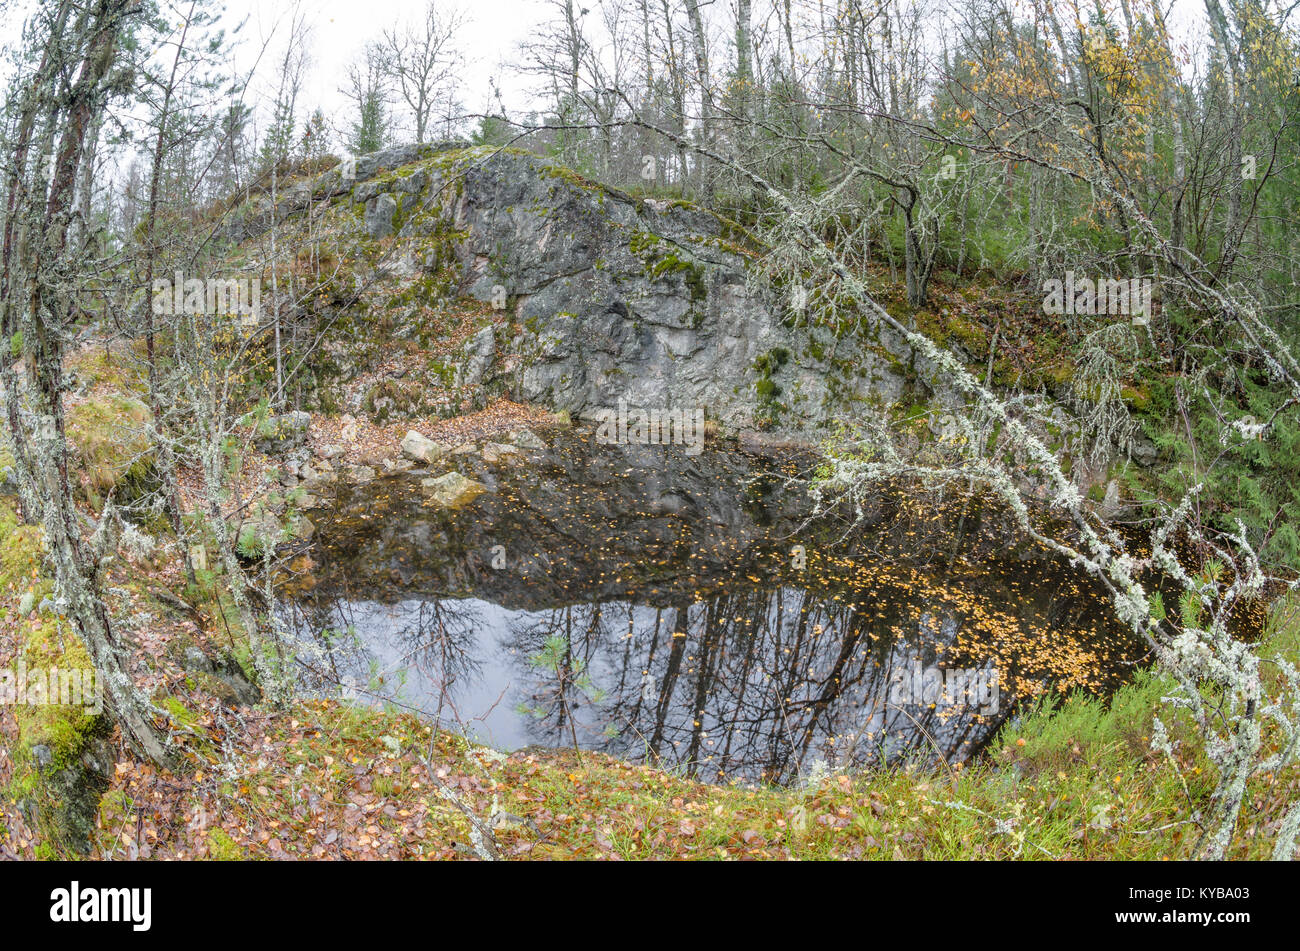 Landsverk 2, Evje Mineralsti. In late autumn there are no leaves and relics are visible in the forest, so it is the best time to visit this place. Stock Photo